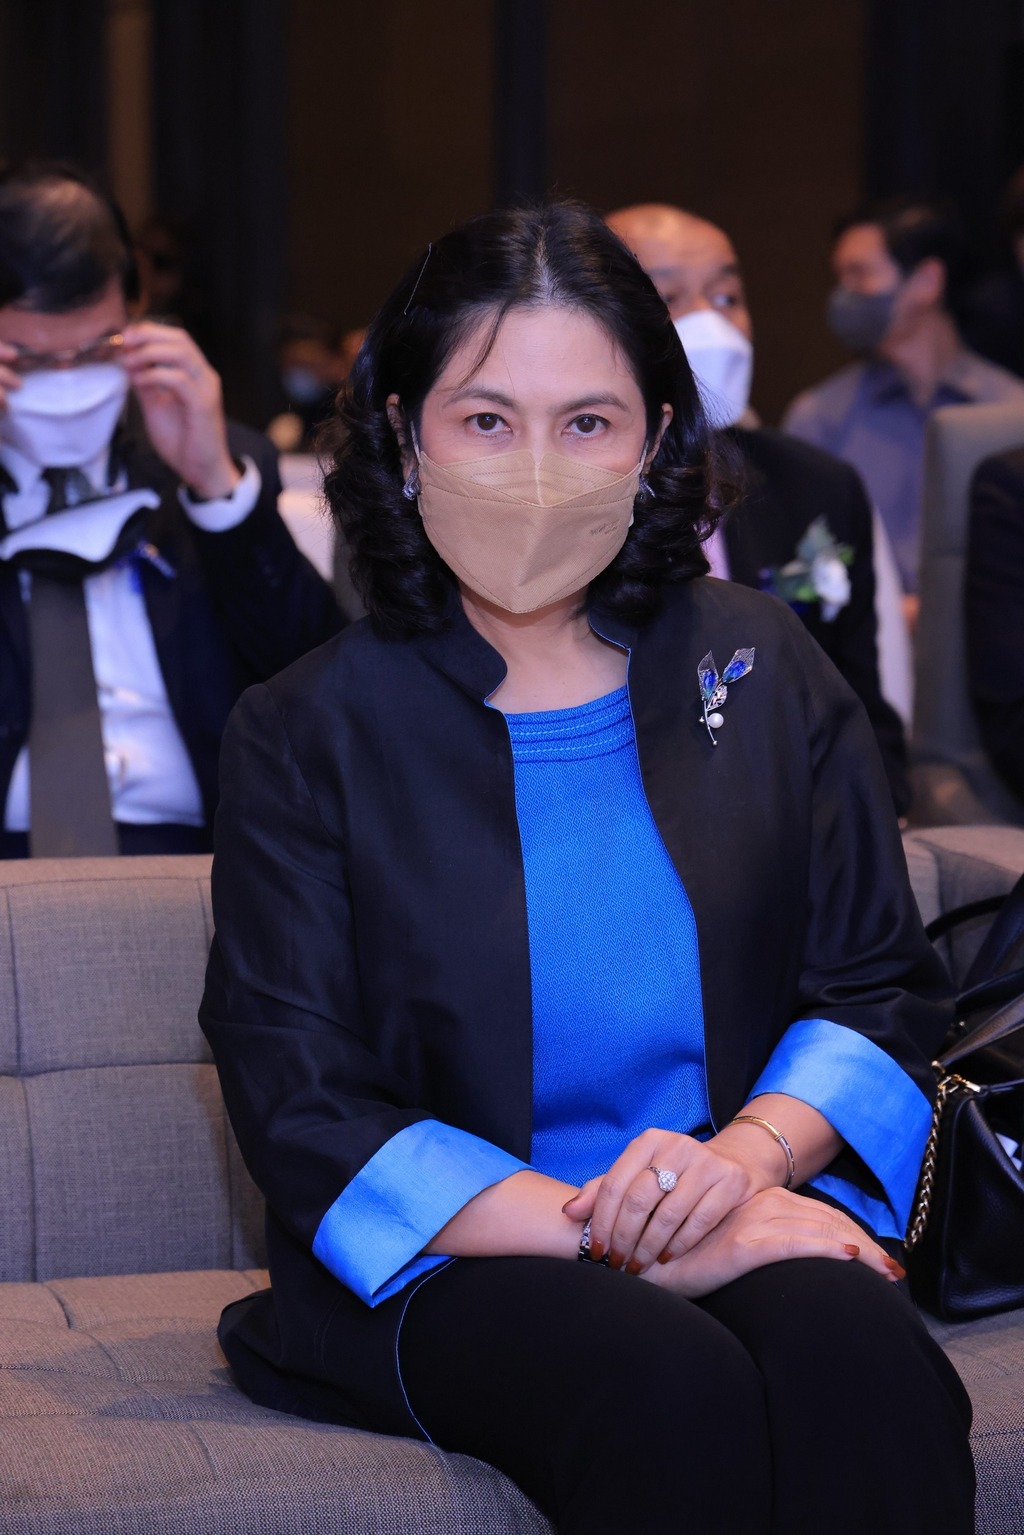 MHESI-Mahidol joining state-private network readying for hosting World RoboCup with 45 nations to show off latest robot advances, transforming industry, digital economy